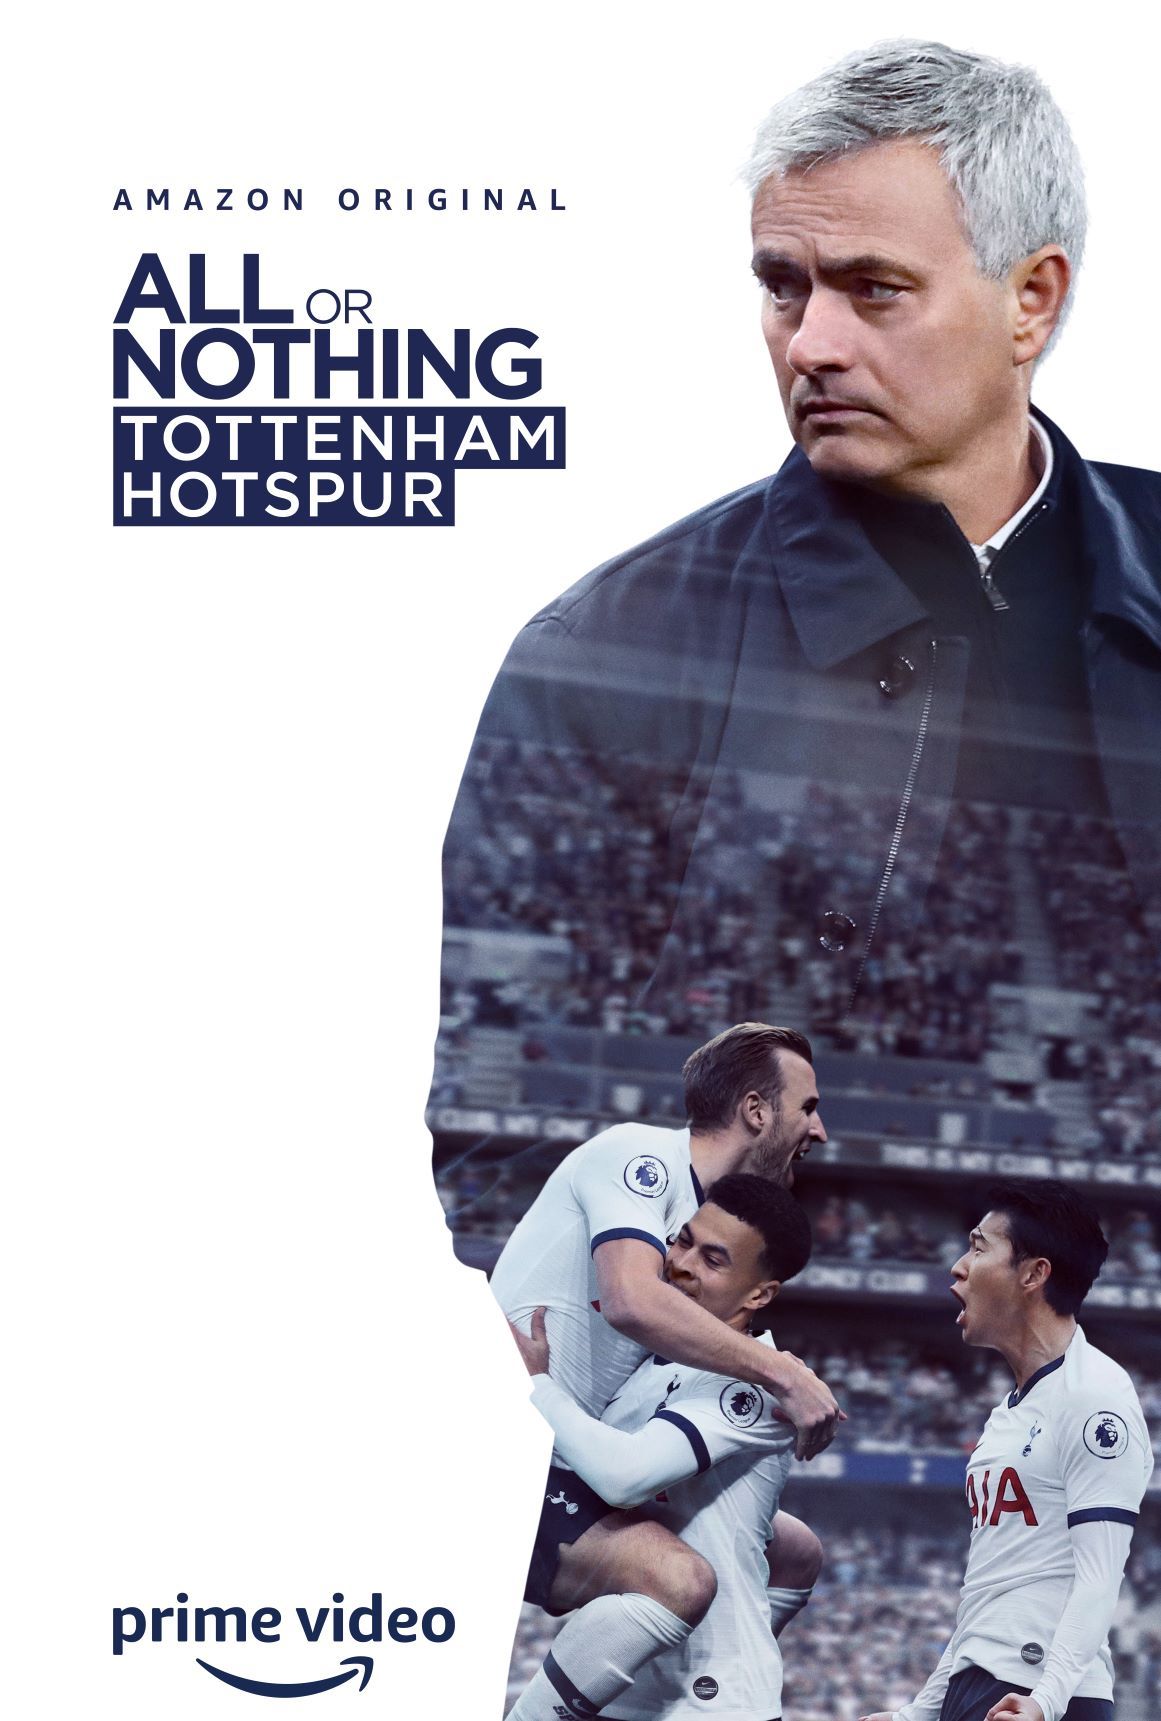 All Or Nothing Tottenham Hotspur On Amazon Prime Video Is A Treat To All Football Buffs Estrade India Business News Financial News Indian Stock Market Sensex Nifty Ipos